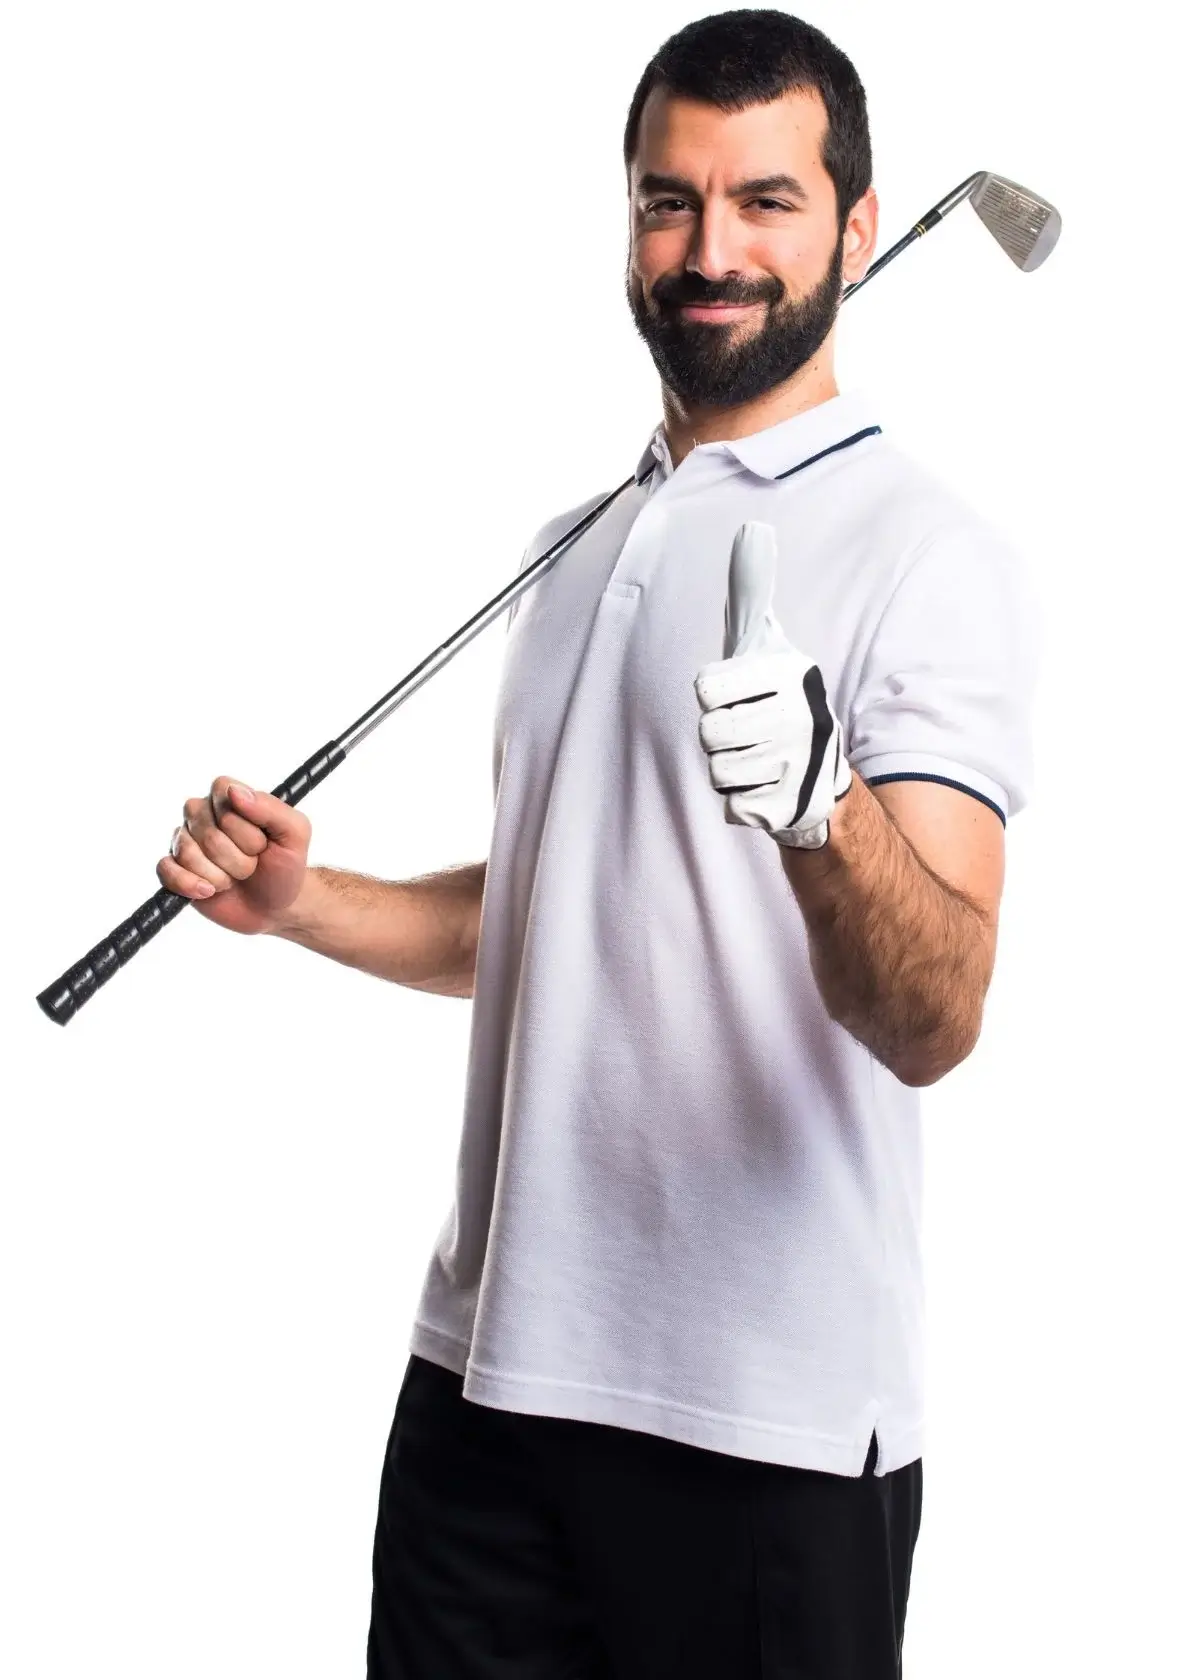 What are the benefits of using performance golf t-shirts?